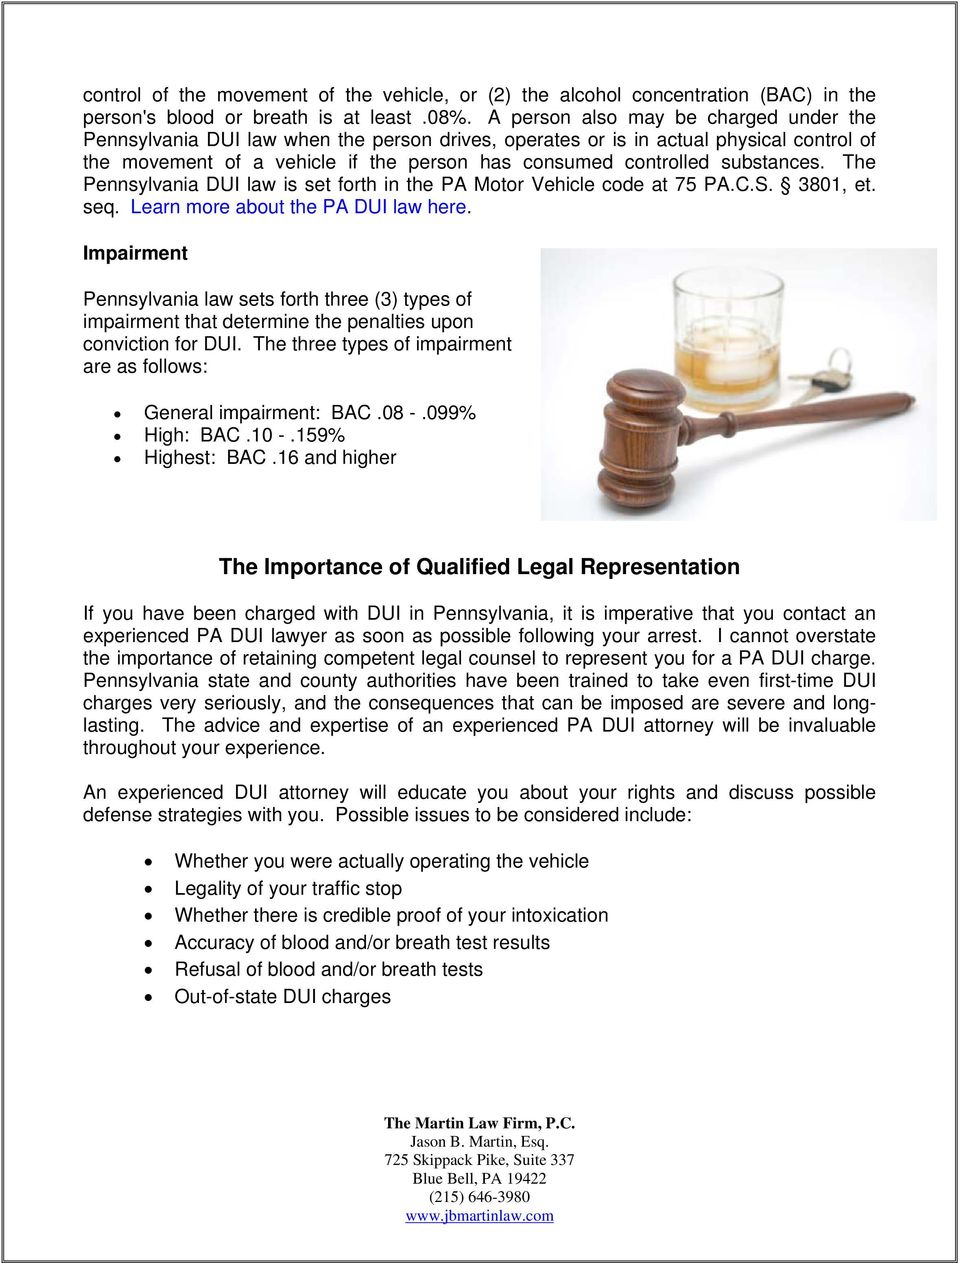 substances. The Pennsylvania DUI law is set forth in the PA Motor Vehicle code at 75 PA.C.S. 3801, et. seq. Learn more about the PA DUI law here.